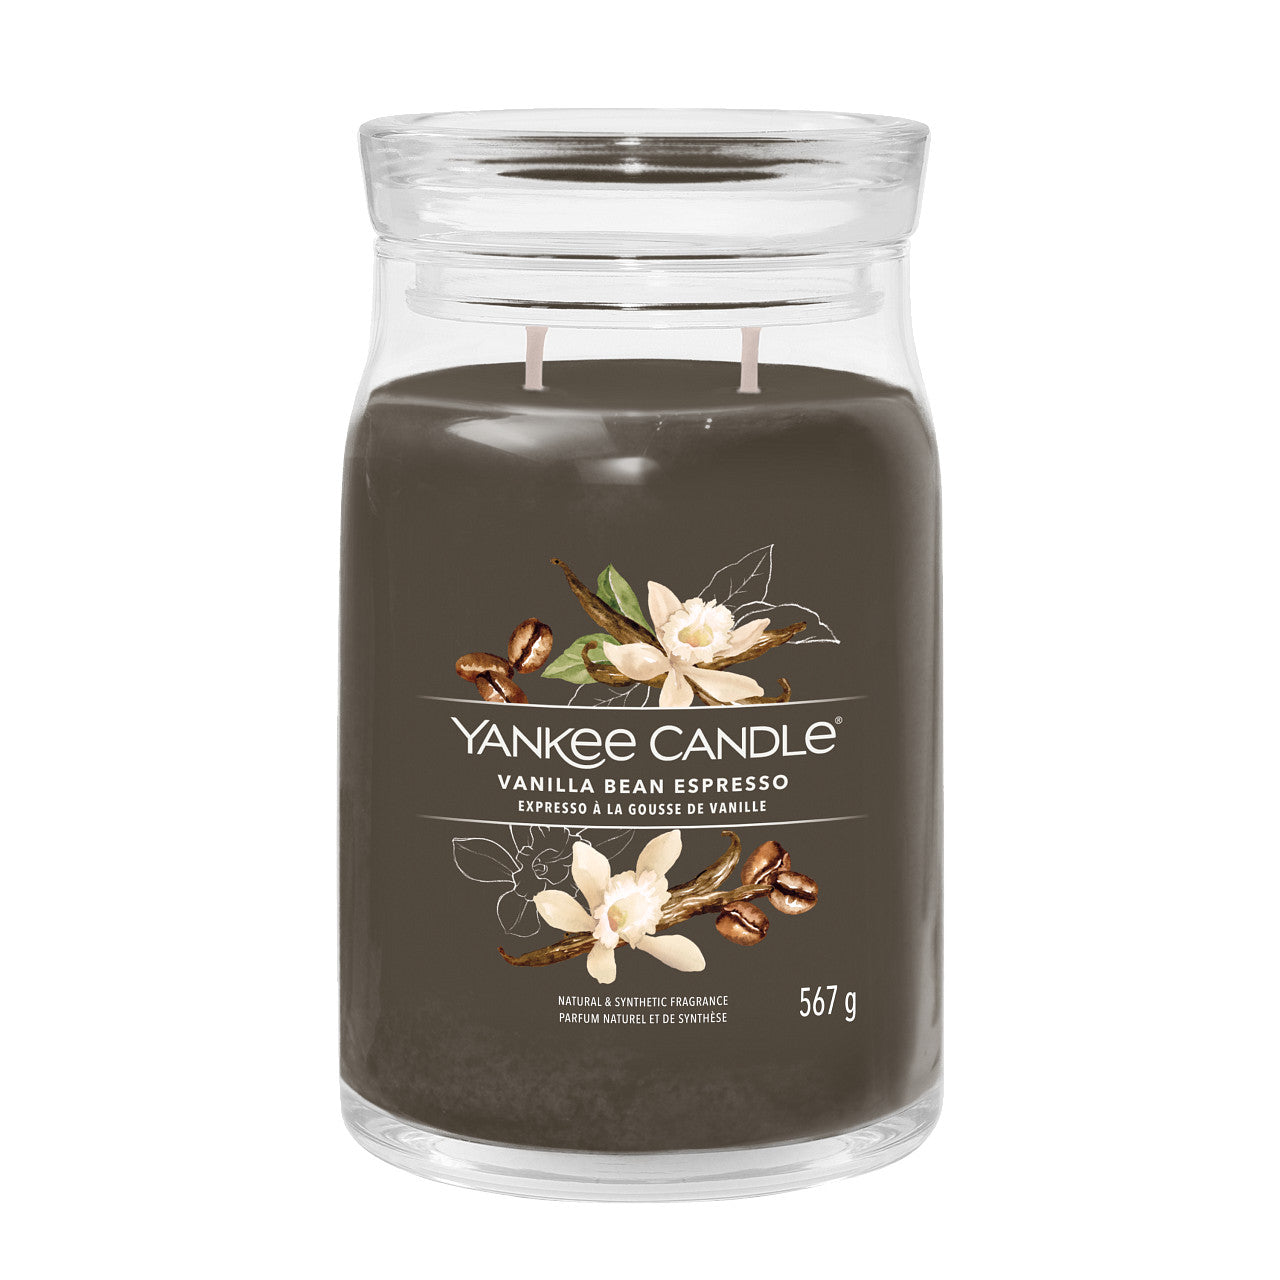 Vanilla Bean Expresso - Signature Large Jar Scented Candle